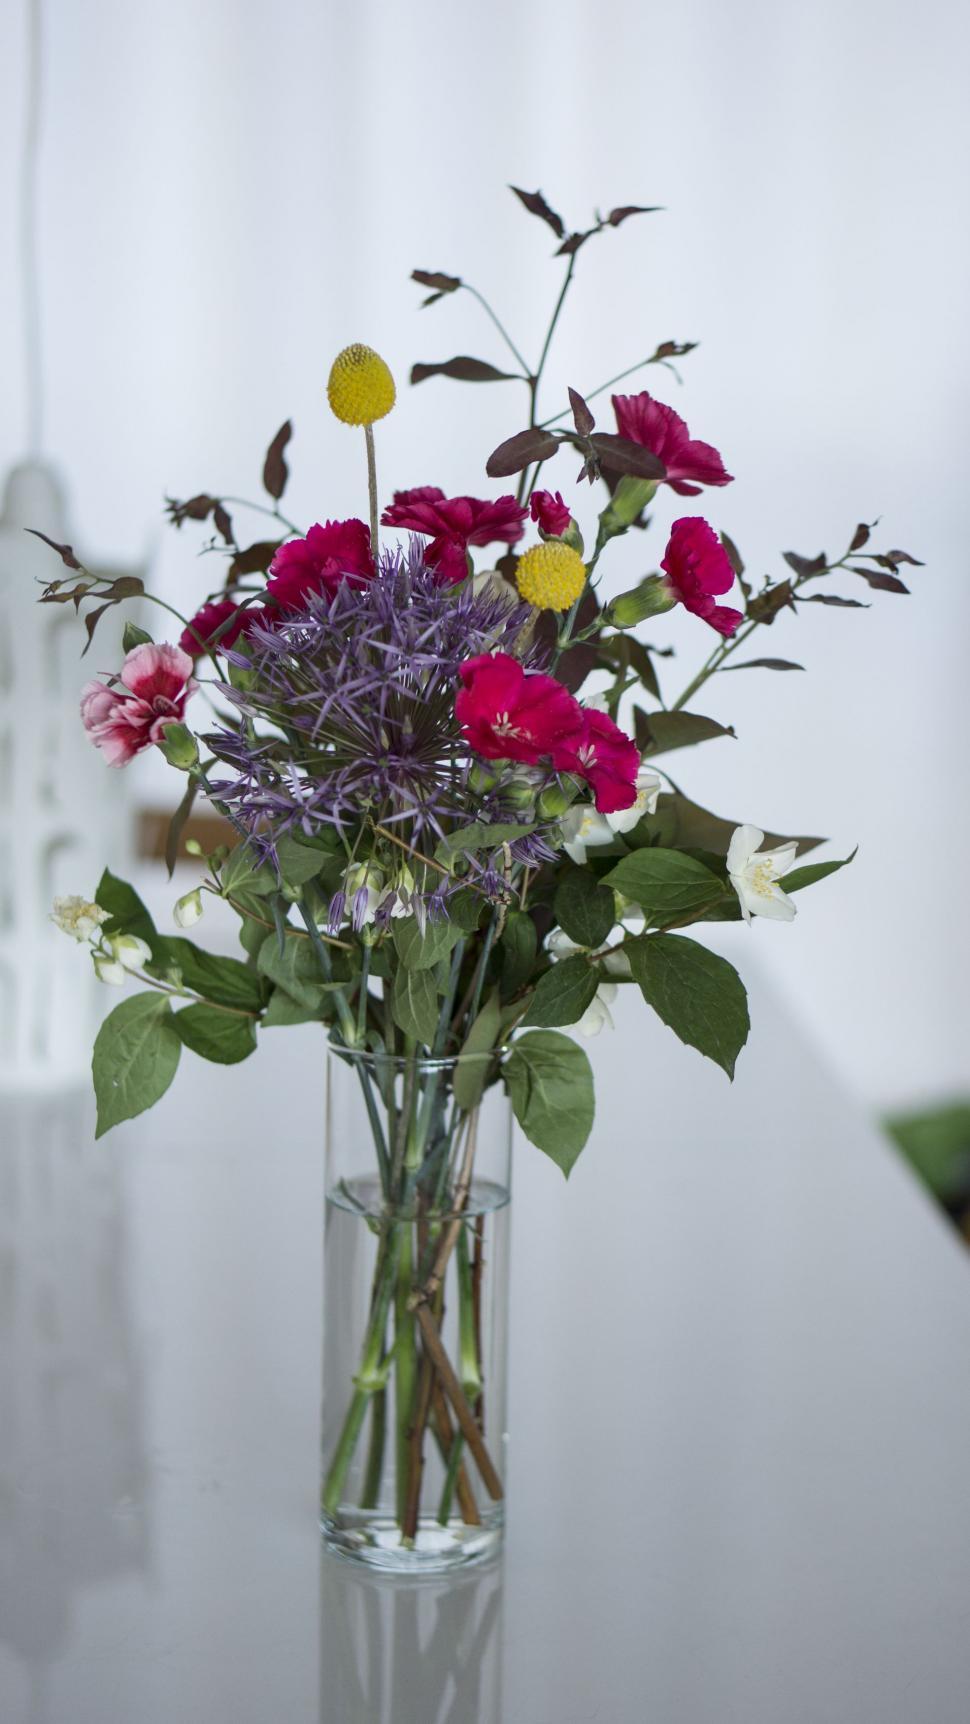 Free Image of Flowers in Glass Vase  